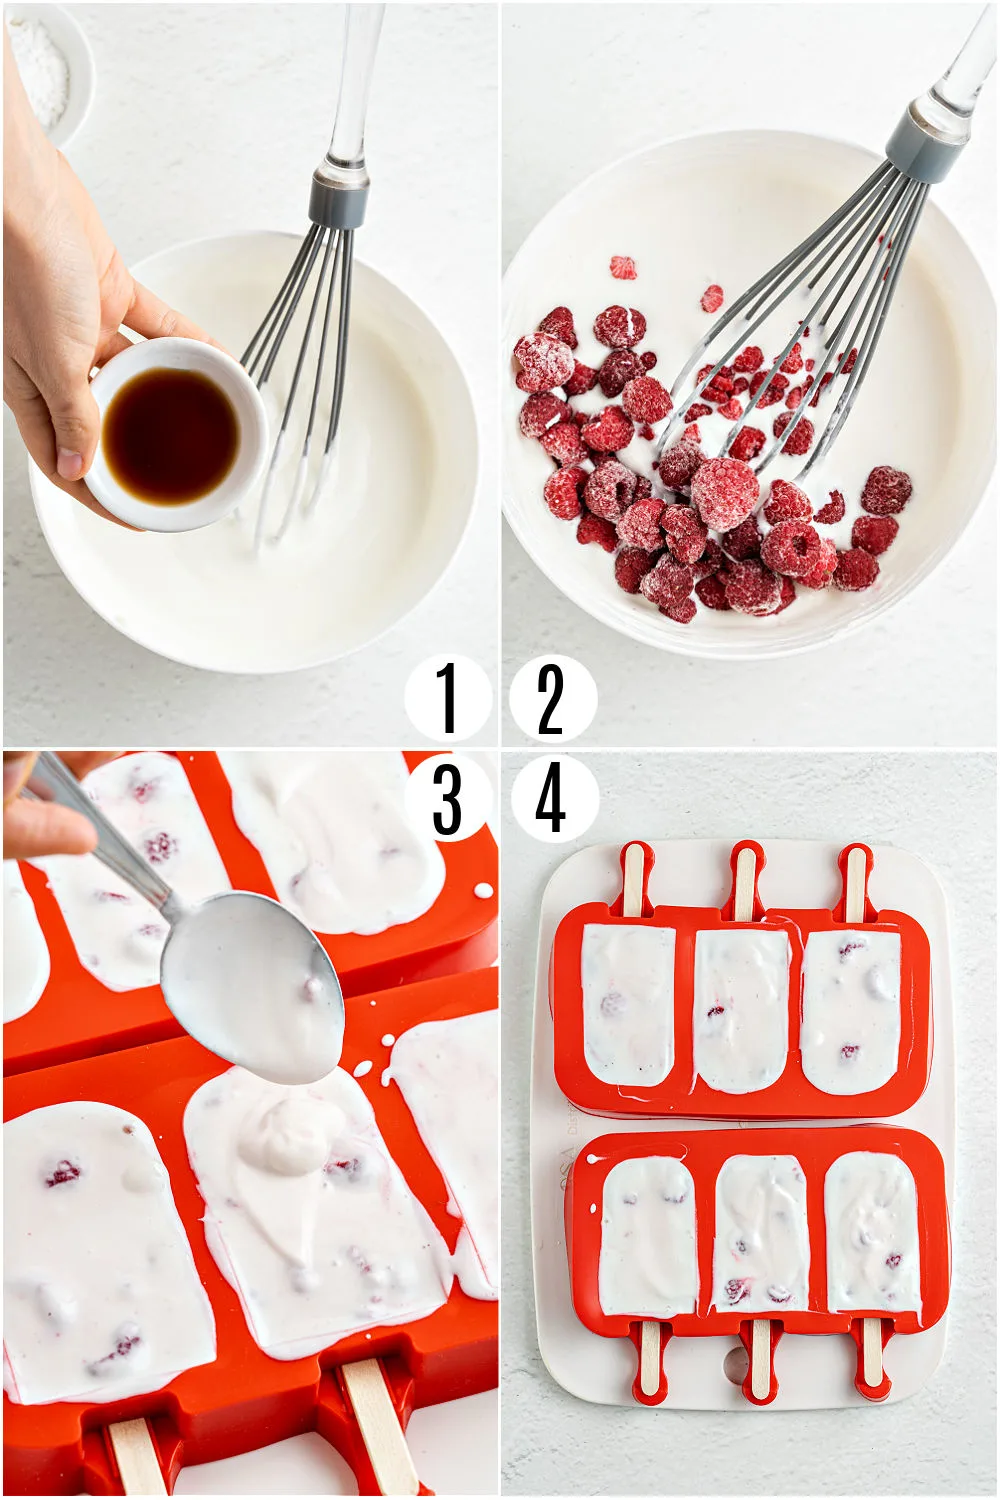 Step by step photos showing how to make yogurt popsicles.